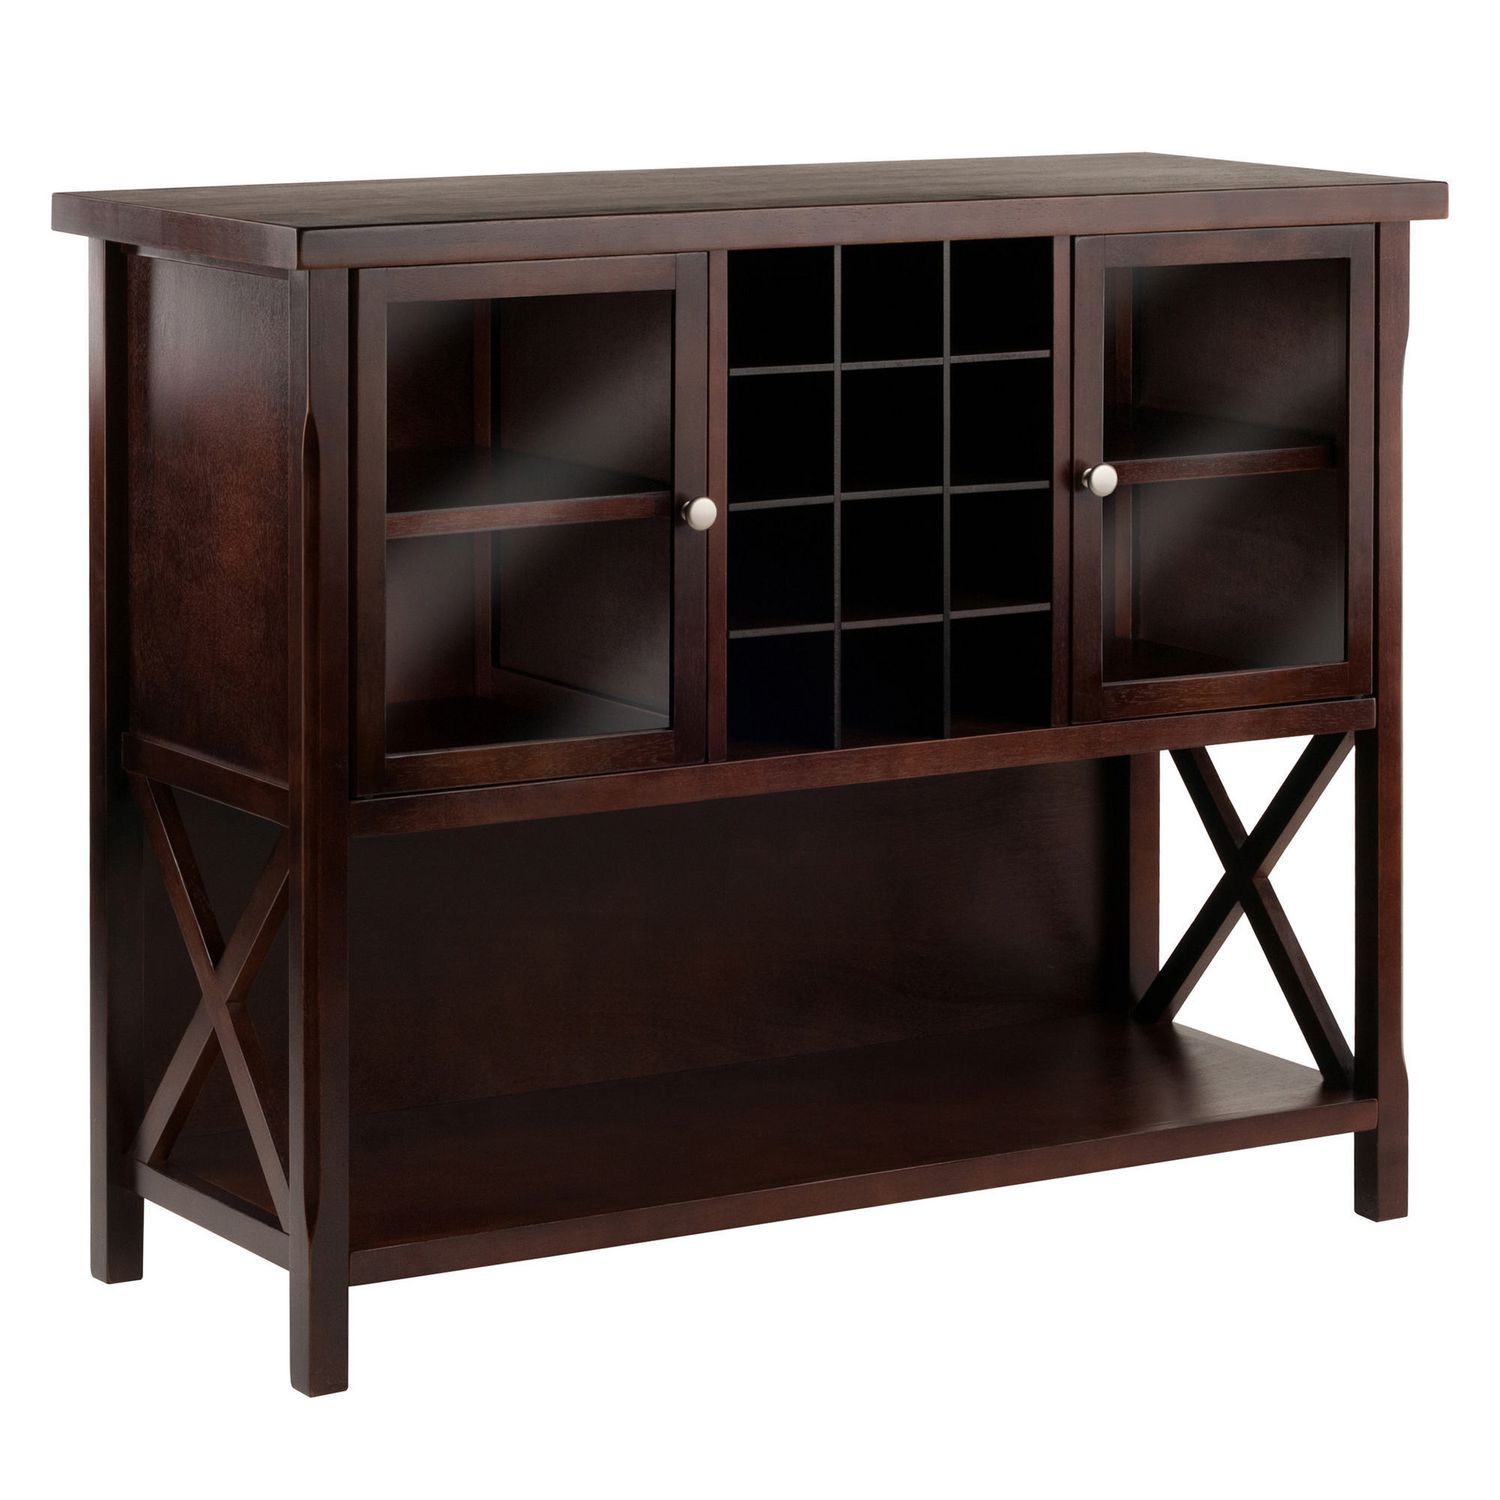 Winsome Xola Buffet Cabinet Intended For Wooden Buffets With Two Side Door Storage Cabinets And Stemware Rack (View 26 of 30)